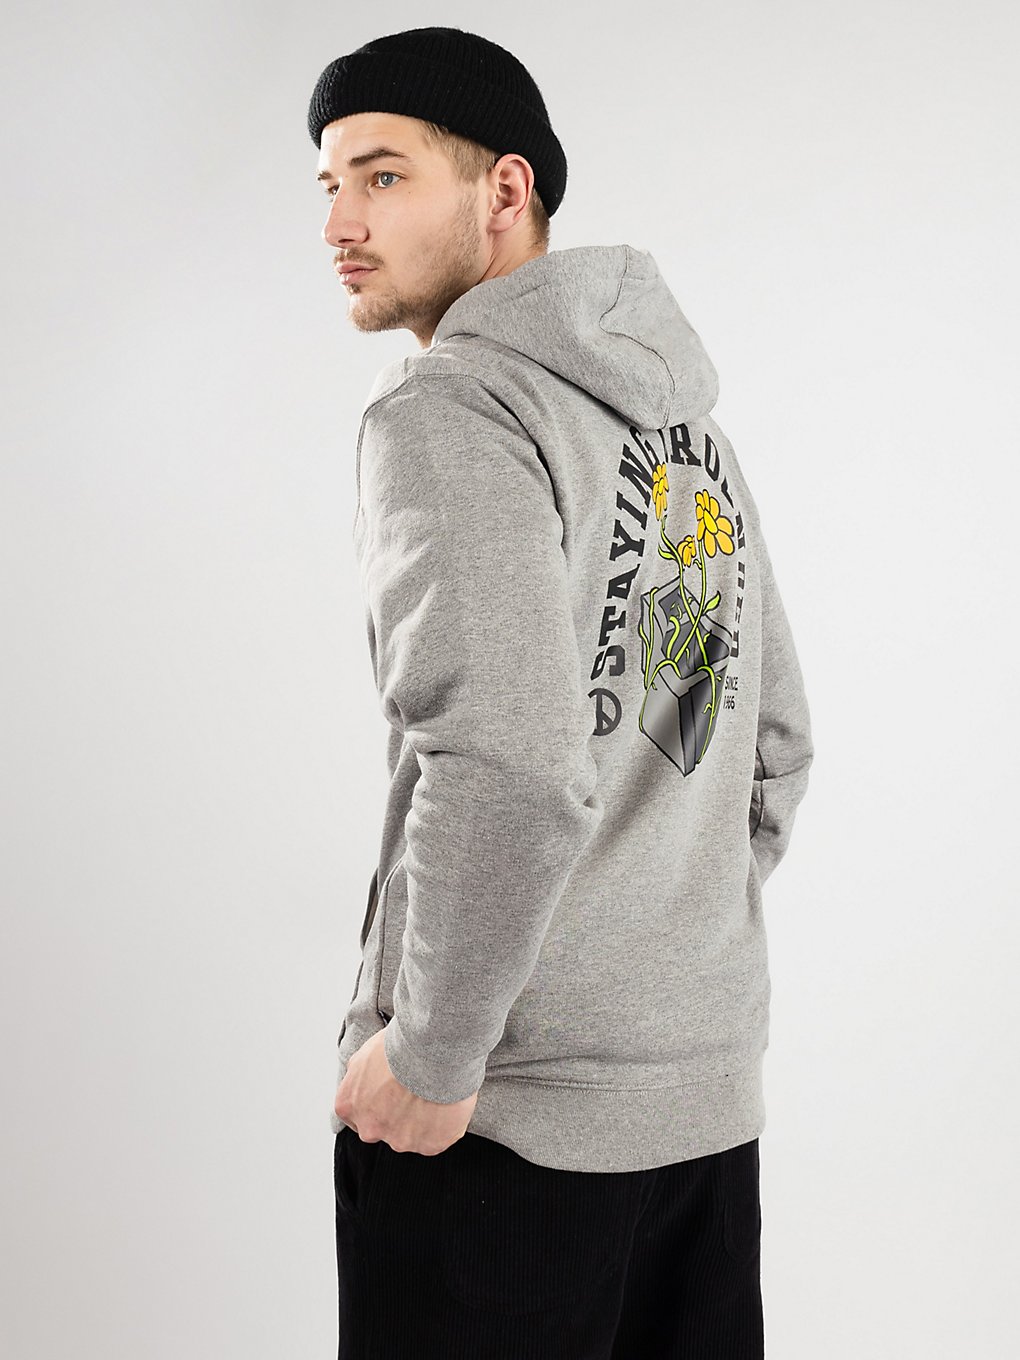 Vans Staying Grounded Hoodie cement heather kaufen